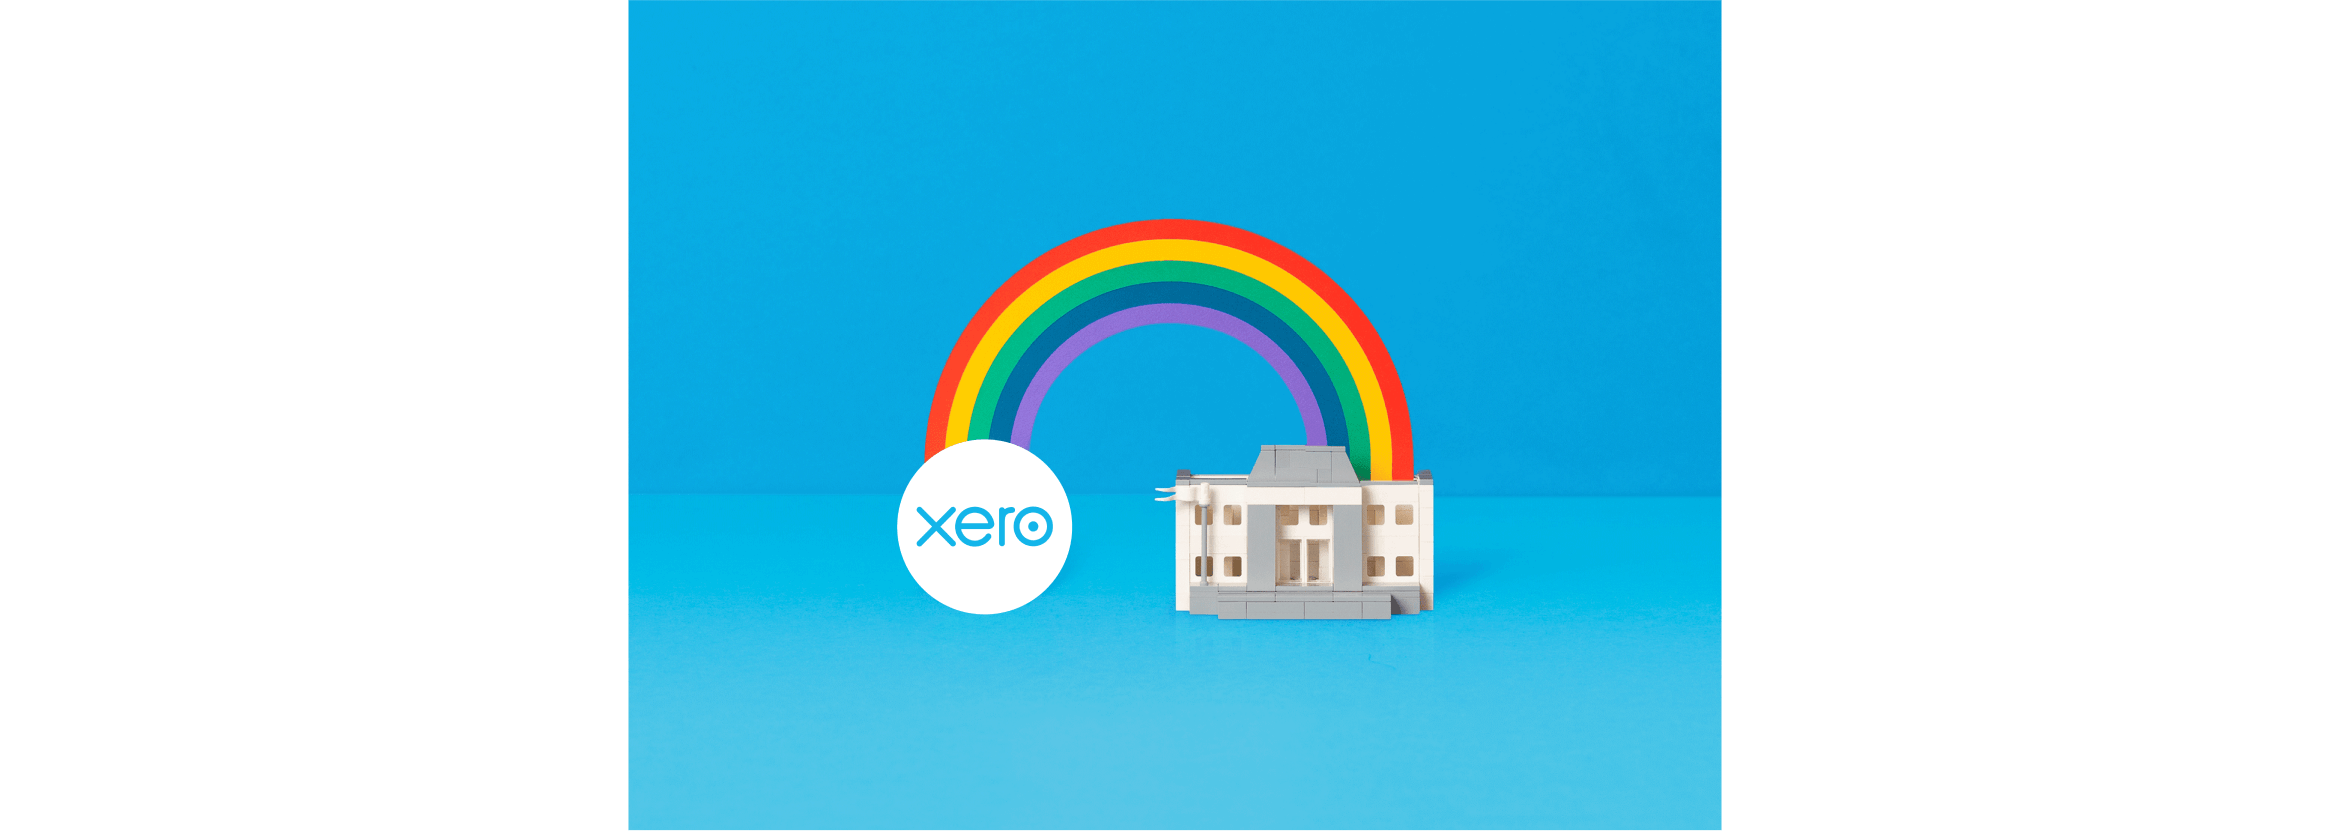 An illustration of a Xero logo and bank building are bridged by a coloured rainbow.